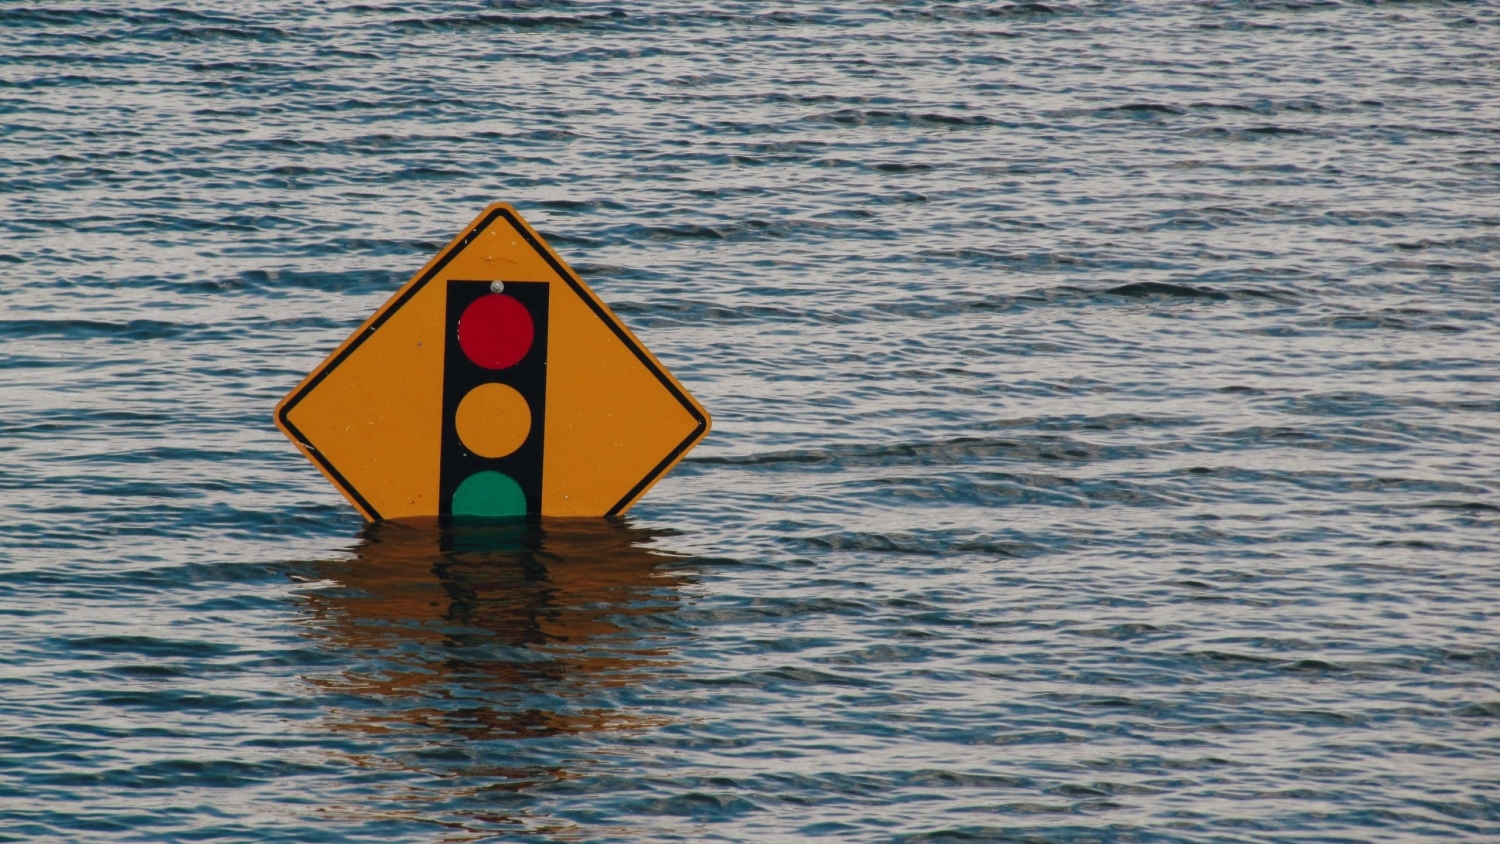 A traffic sign submerged in water.